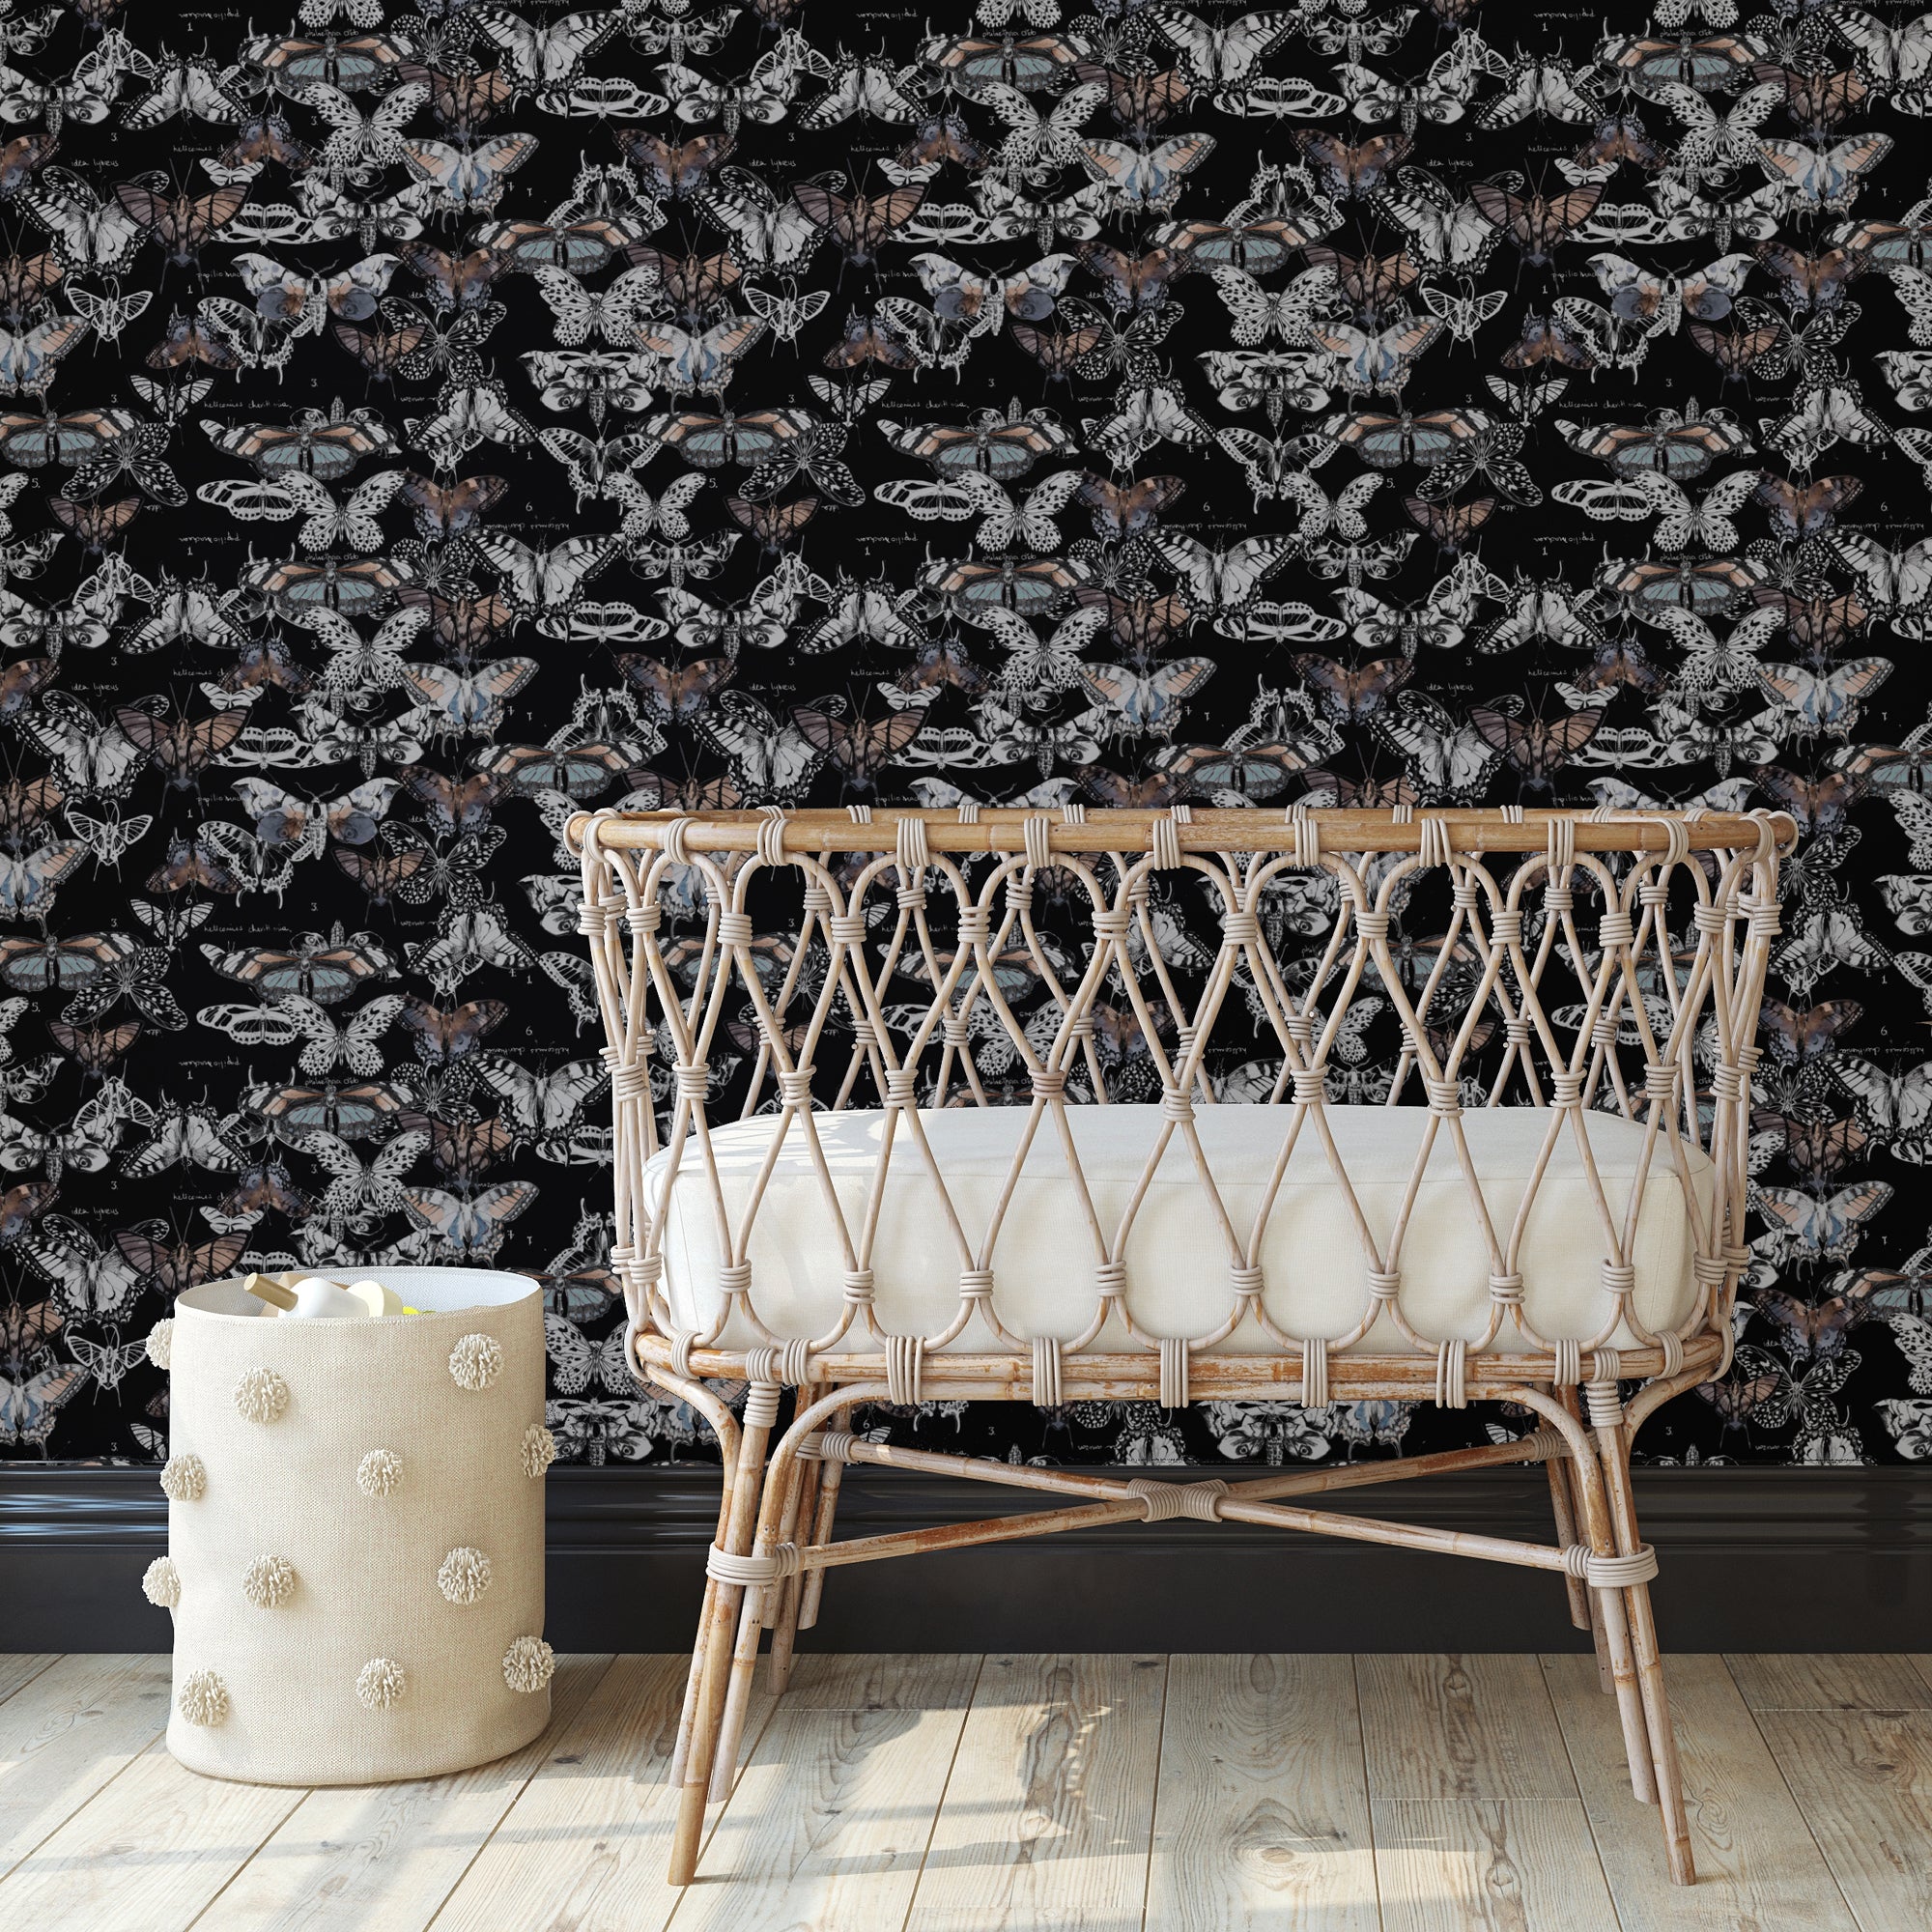 wicker crib with black butterfly wallpaper behind